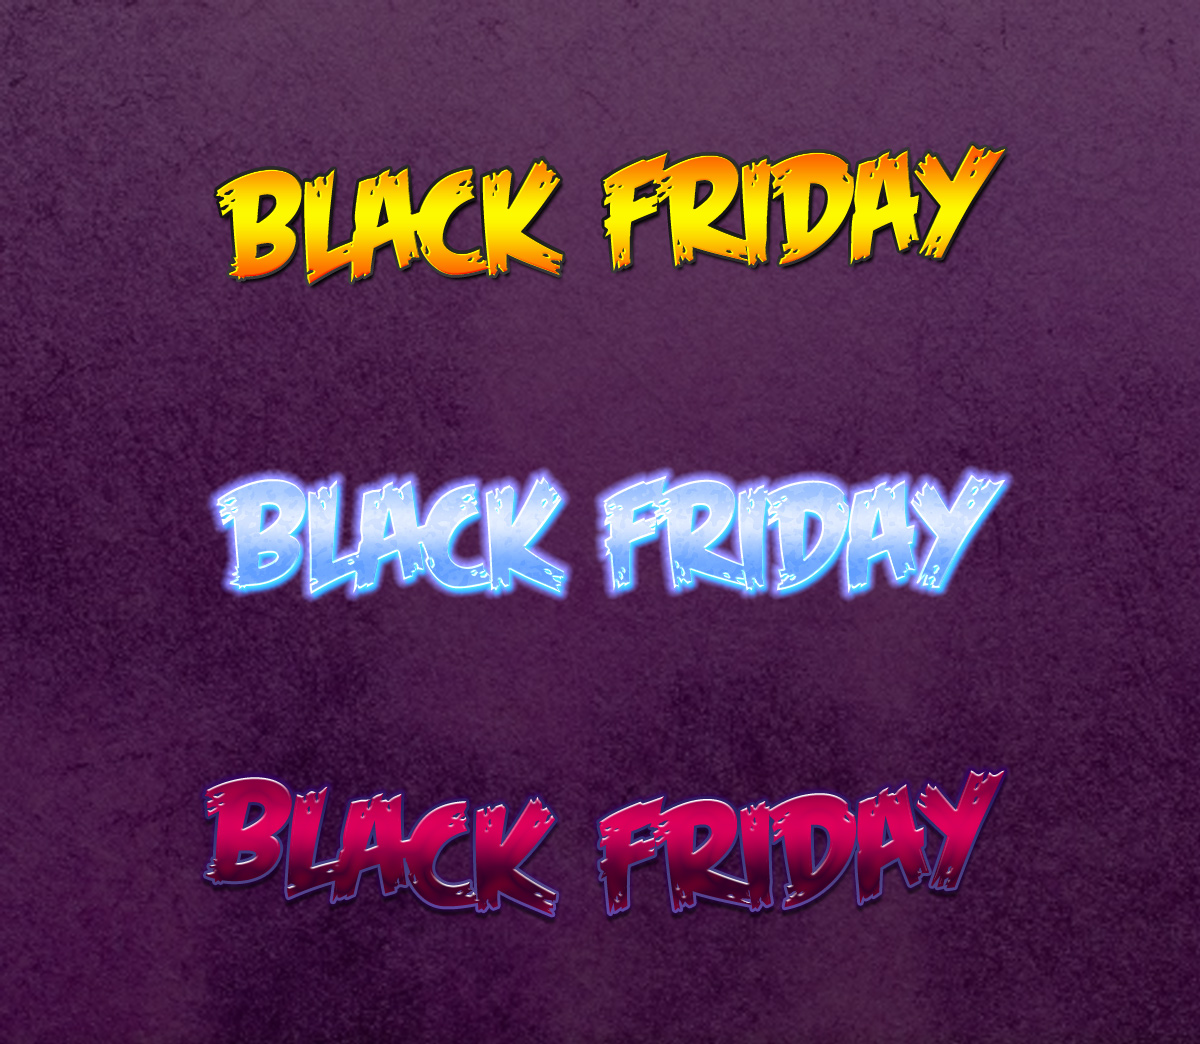 Free Black Friday Photoshop Text Effect, Layer Styles